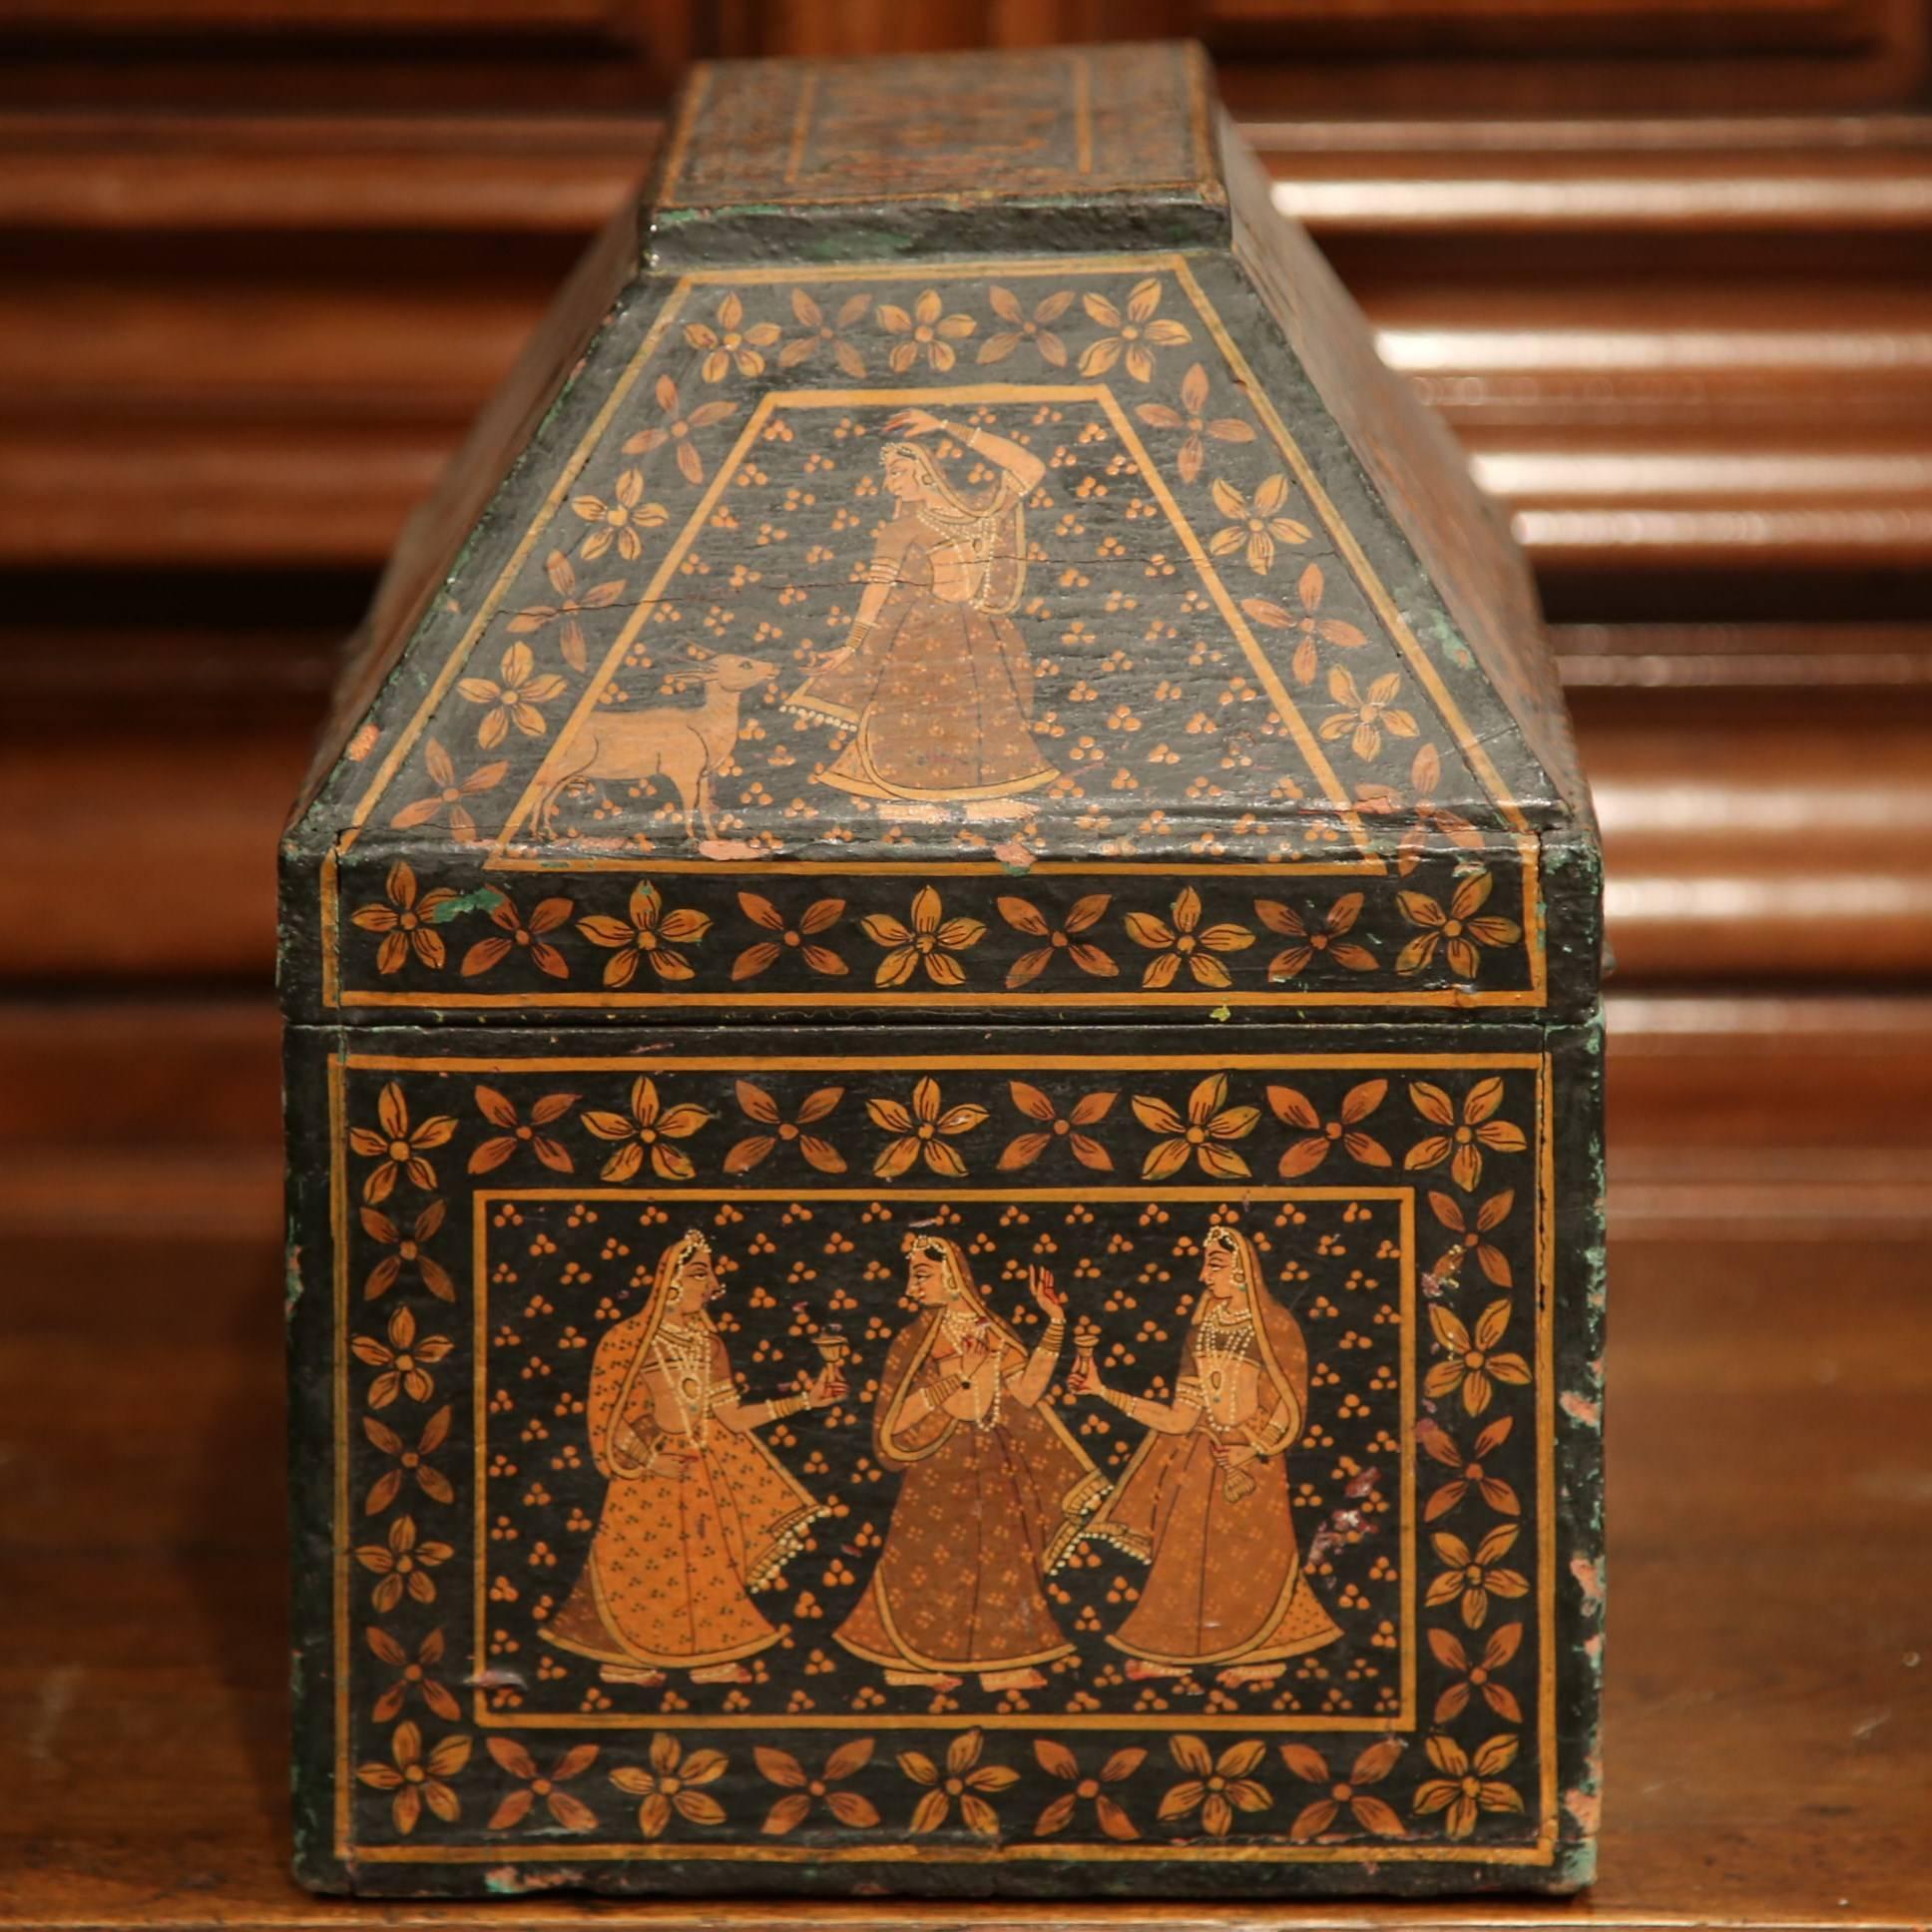 19th Century French Painted Decorative Wood Box with Oriental Figure Decor For Sale 2